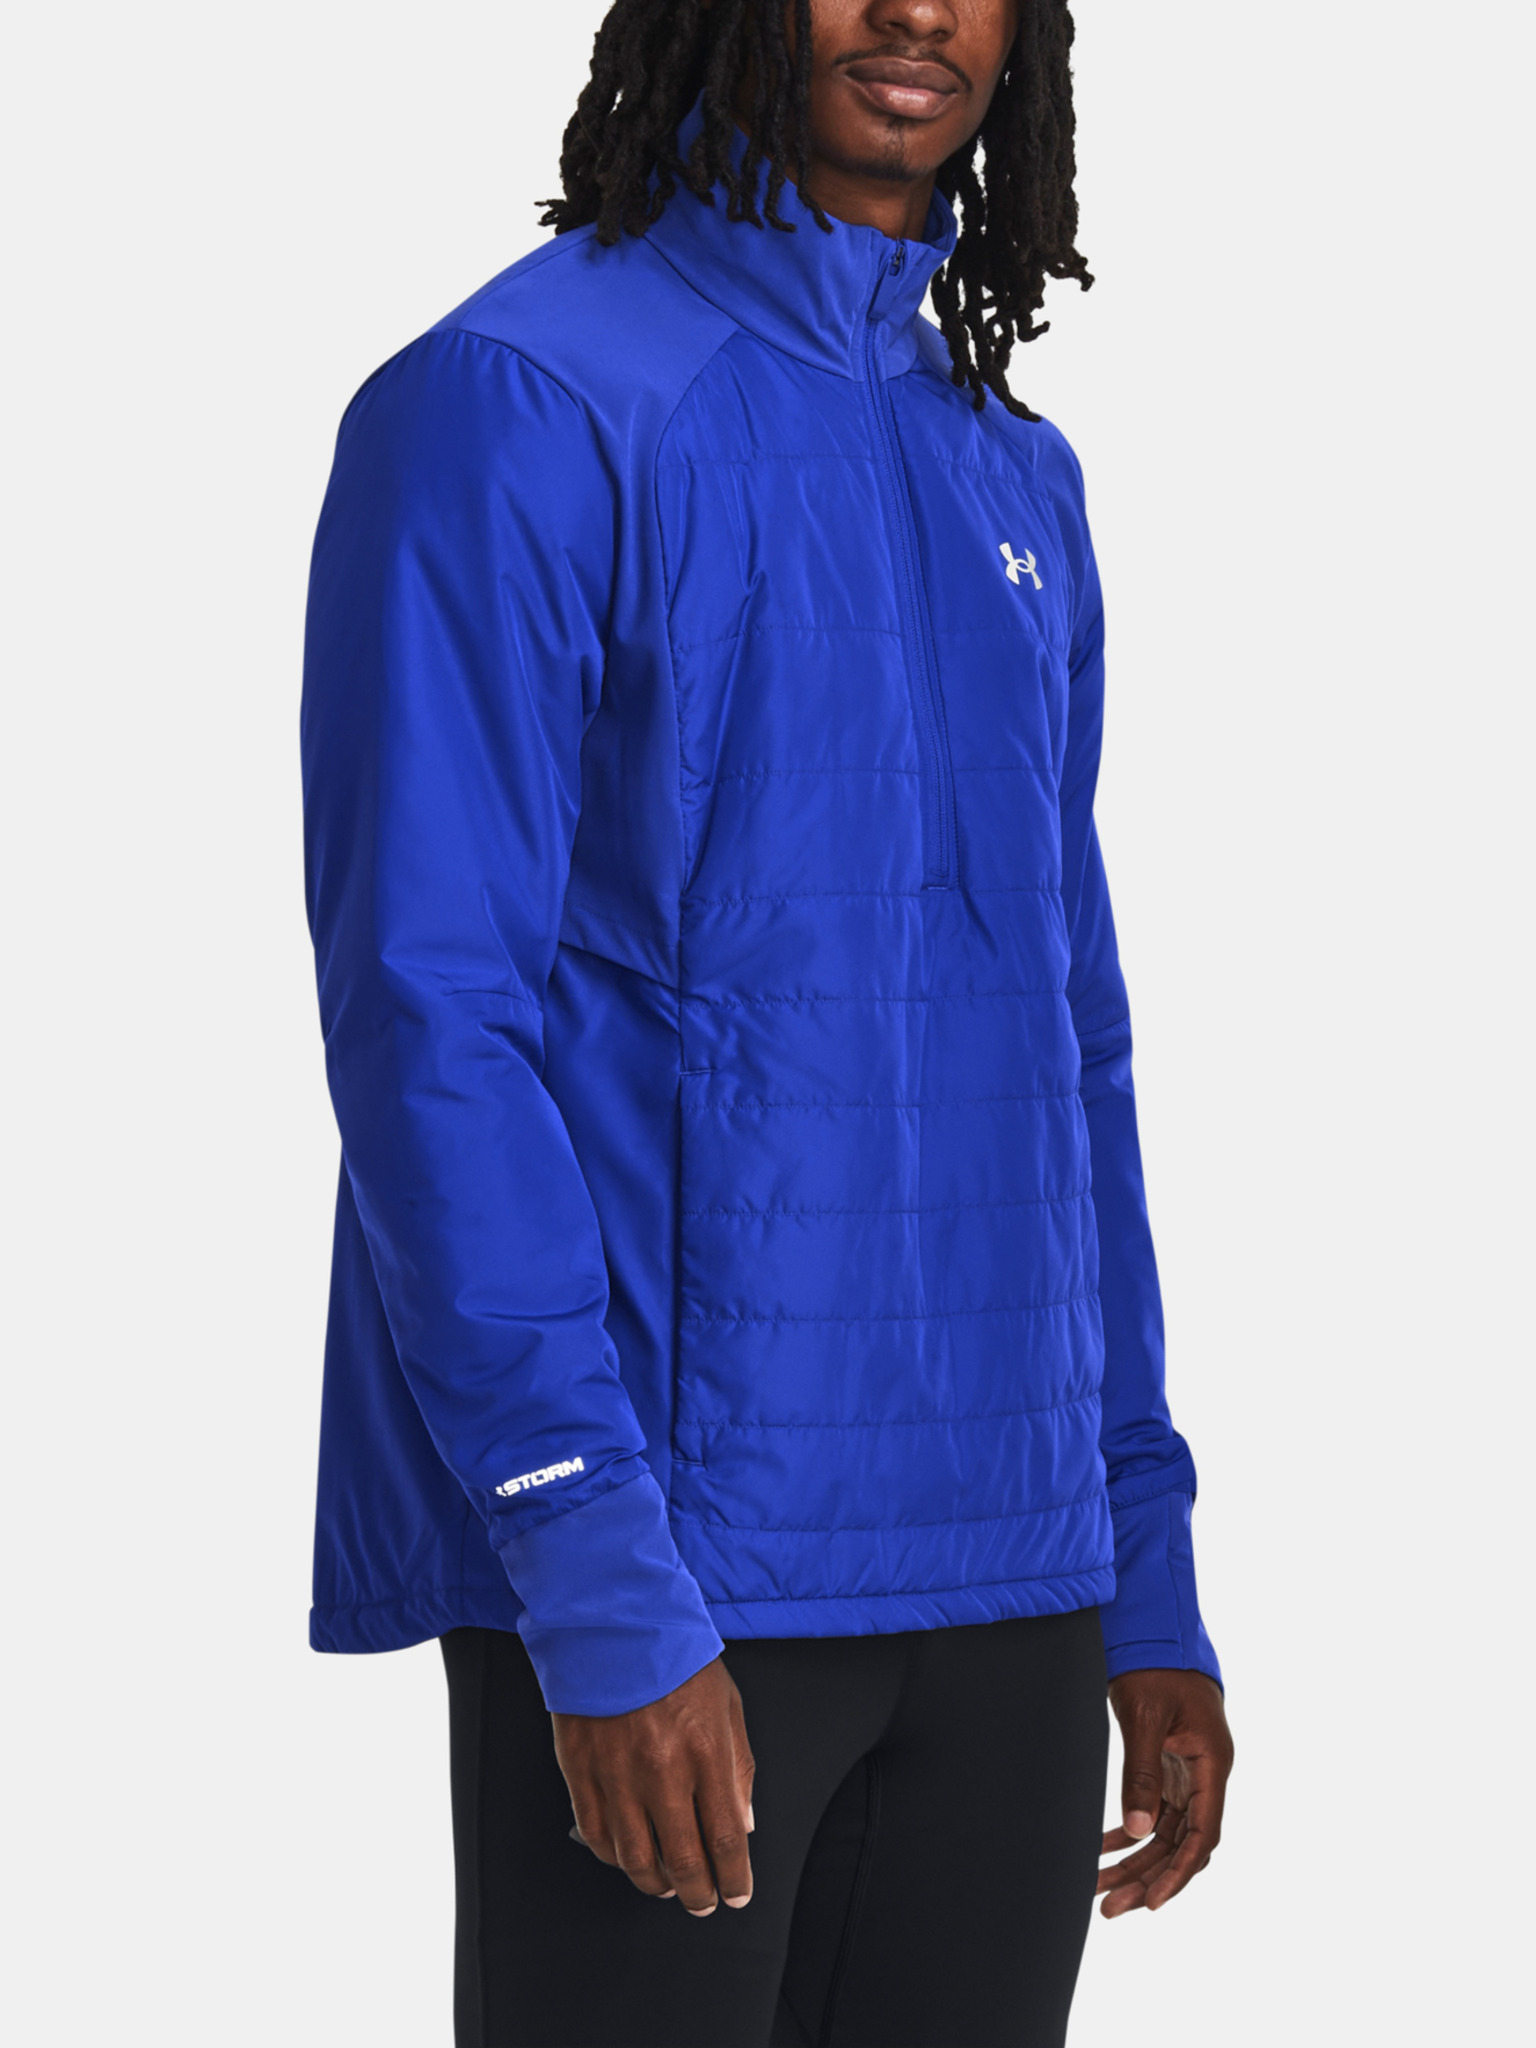 UNDER ARMOUR Men's UA Outrun The Storm Full-Zip Running Jacket